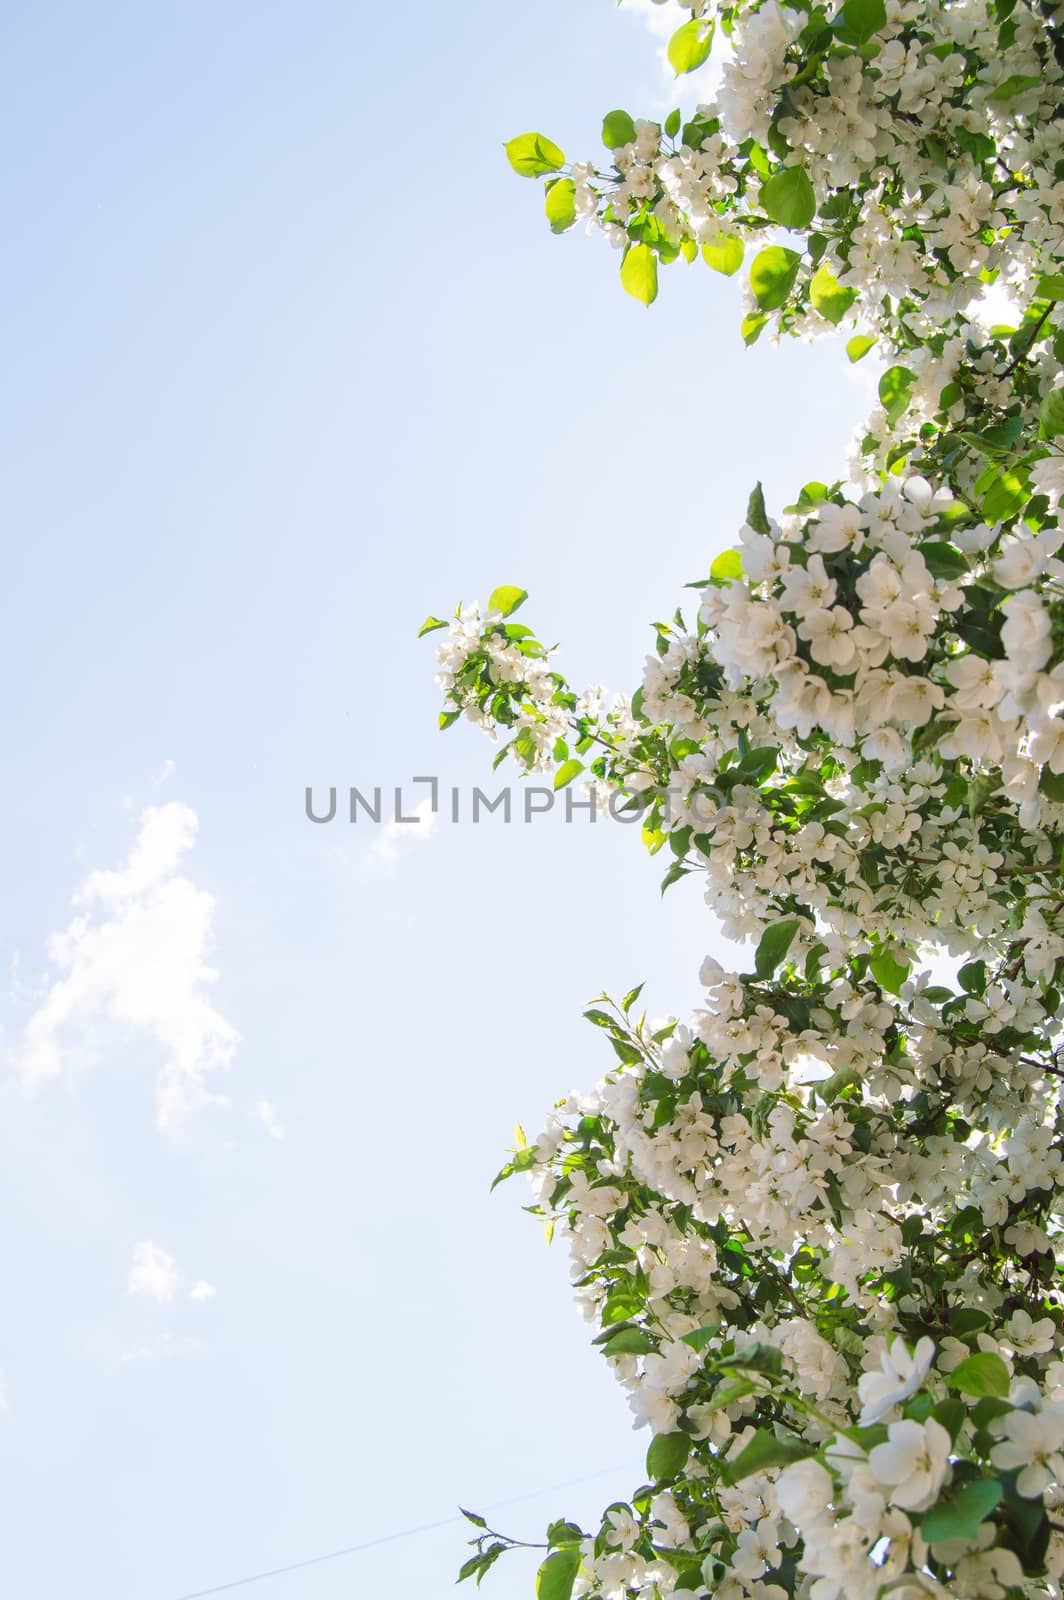 Flowering branches of Apple trees against the blue sky and sunlight by claire_lucia